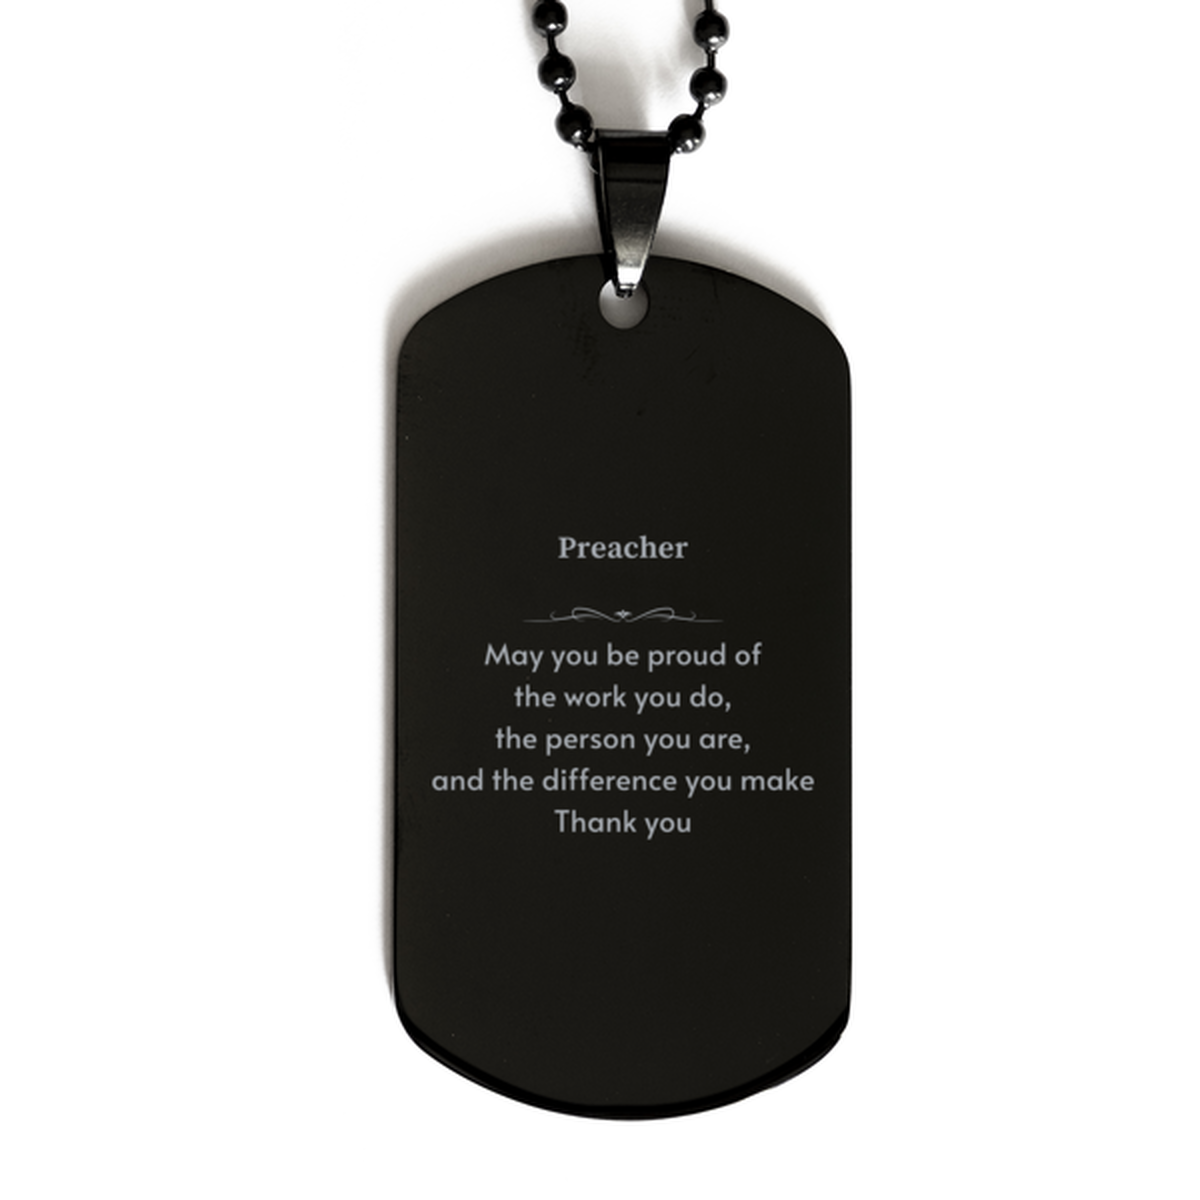 Heartwarming Black Dog Tag Retirement Coworkers Gifts for Preacher, Preacher May You be proud of the work you do, the person you are Gifts for Boss Men Women Friends